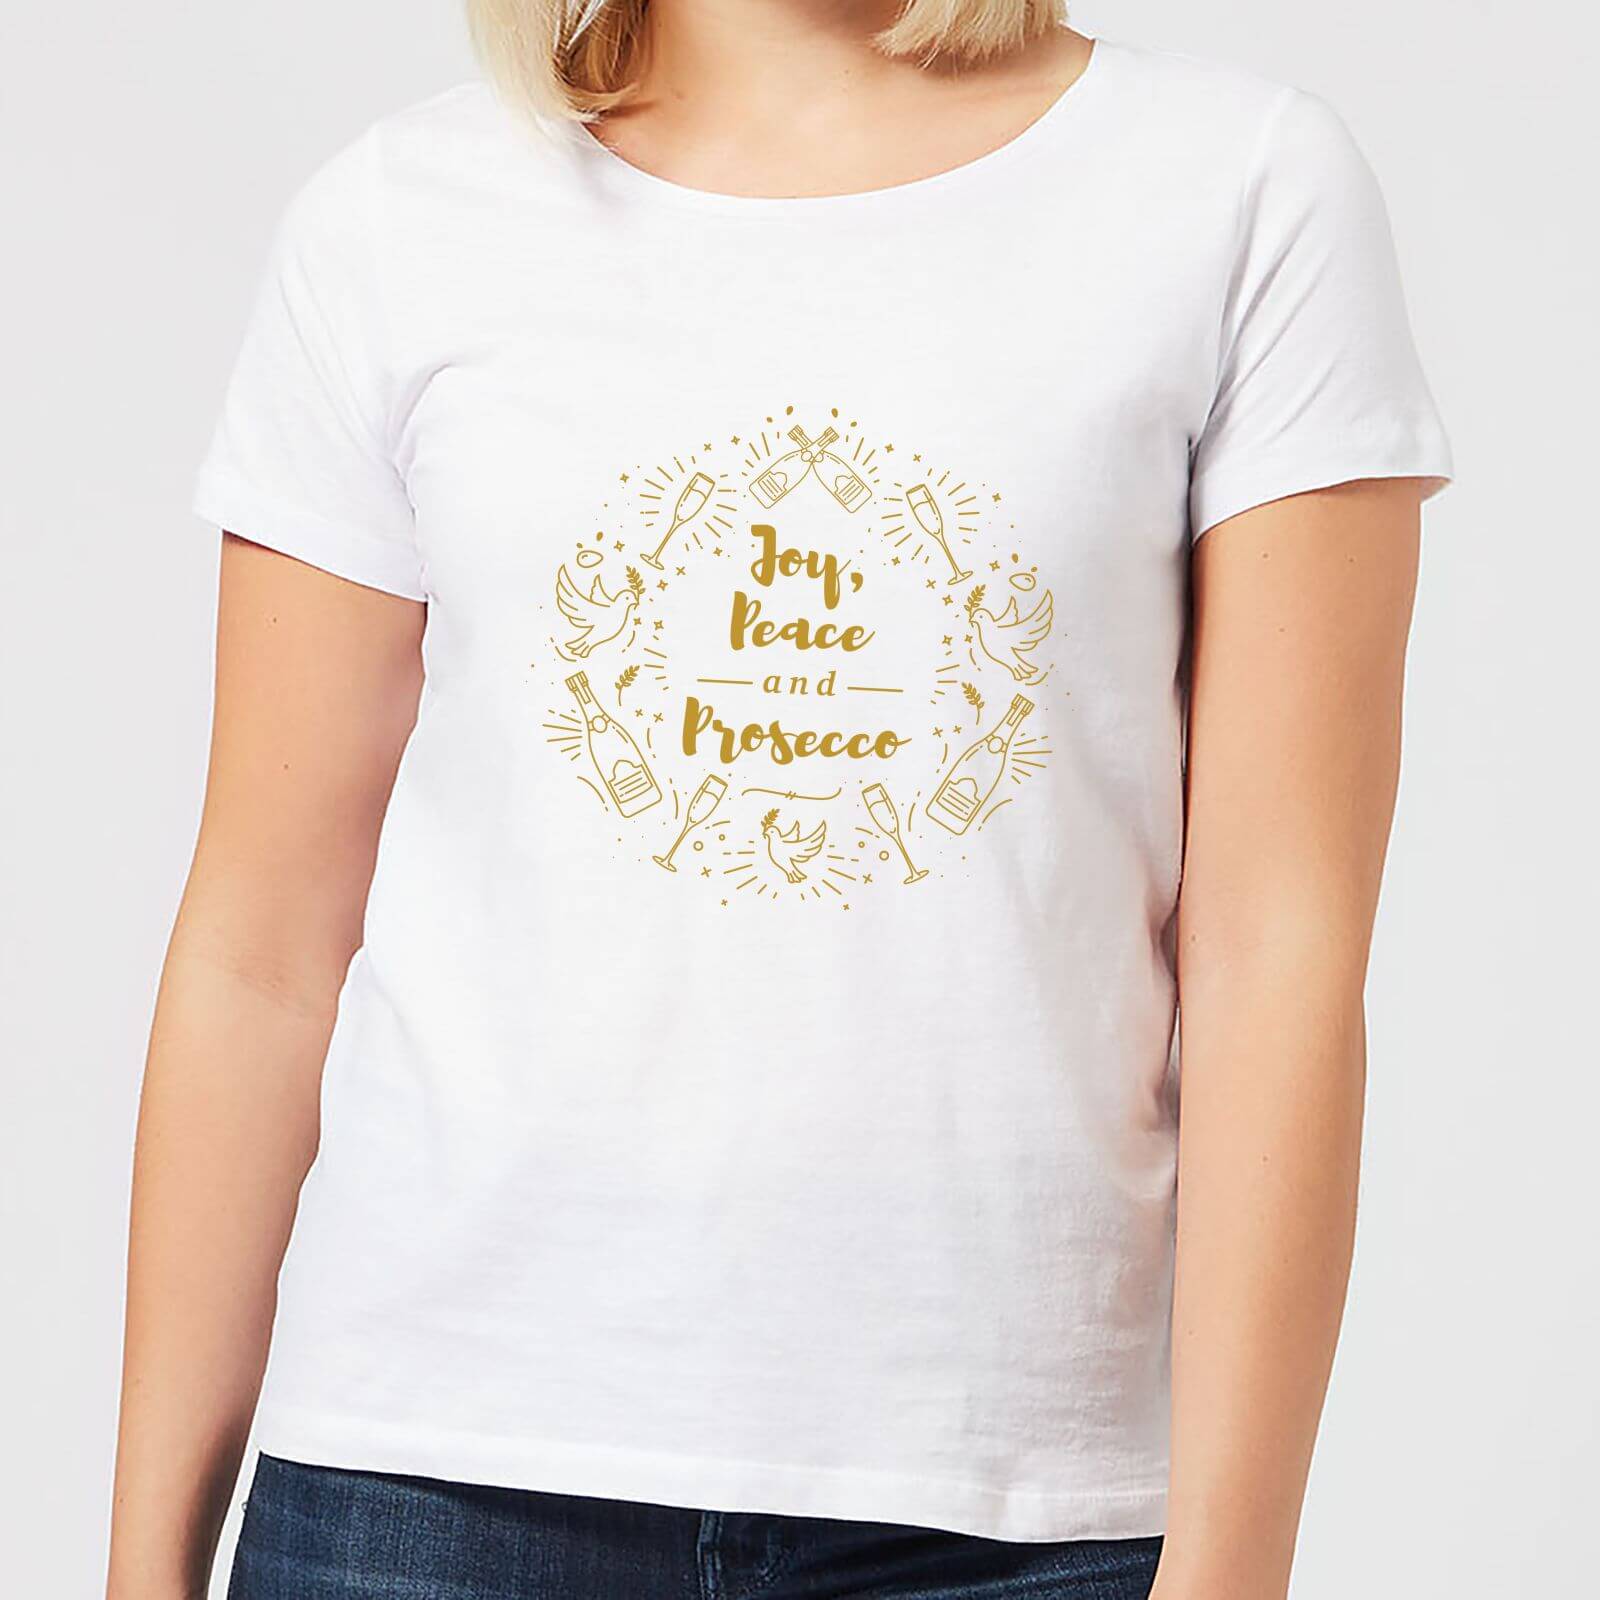 Joy, Peace And Prosecco Women's T-Shirt - White - S